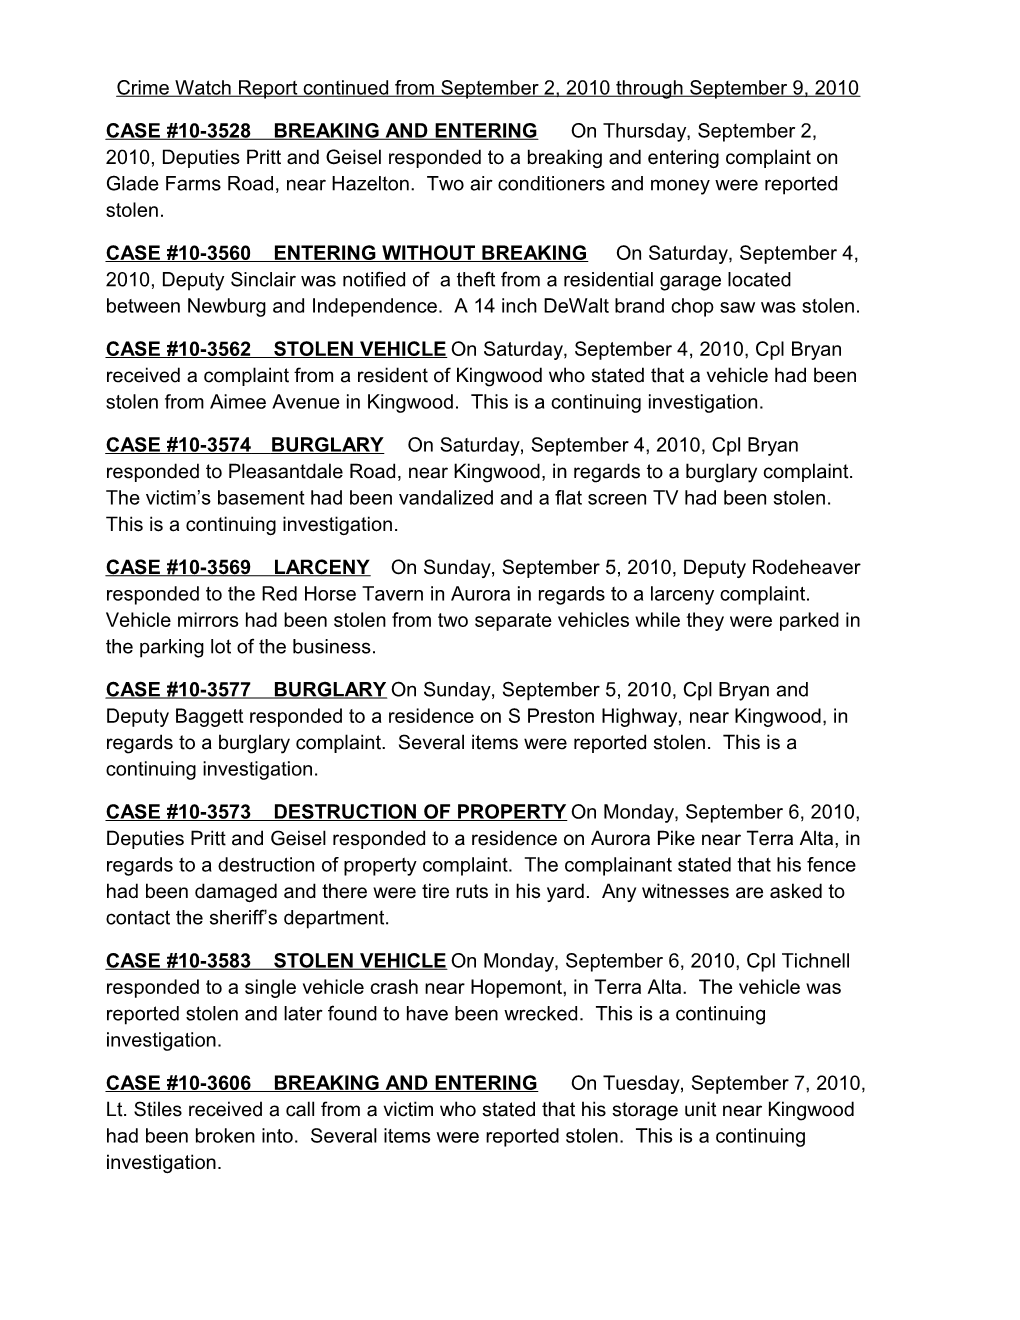 Crime Watch Report Continued from September 2, 2010 Through September 9, 2010